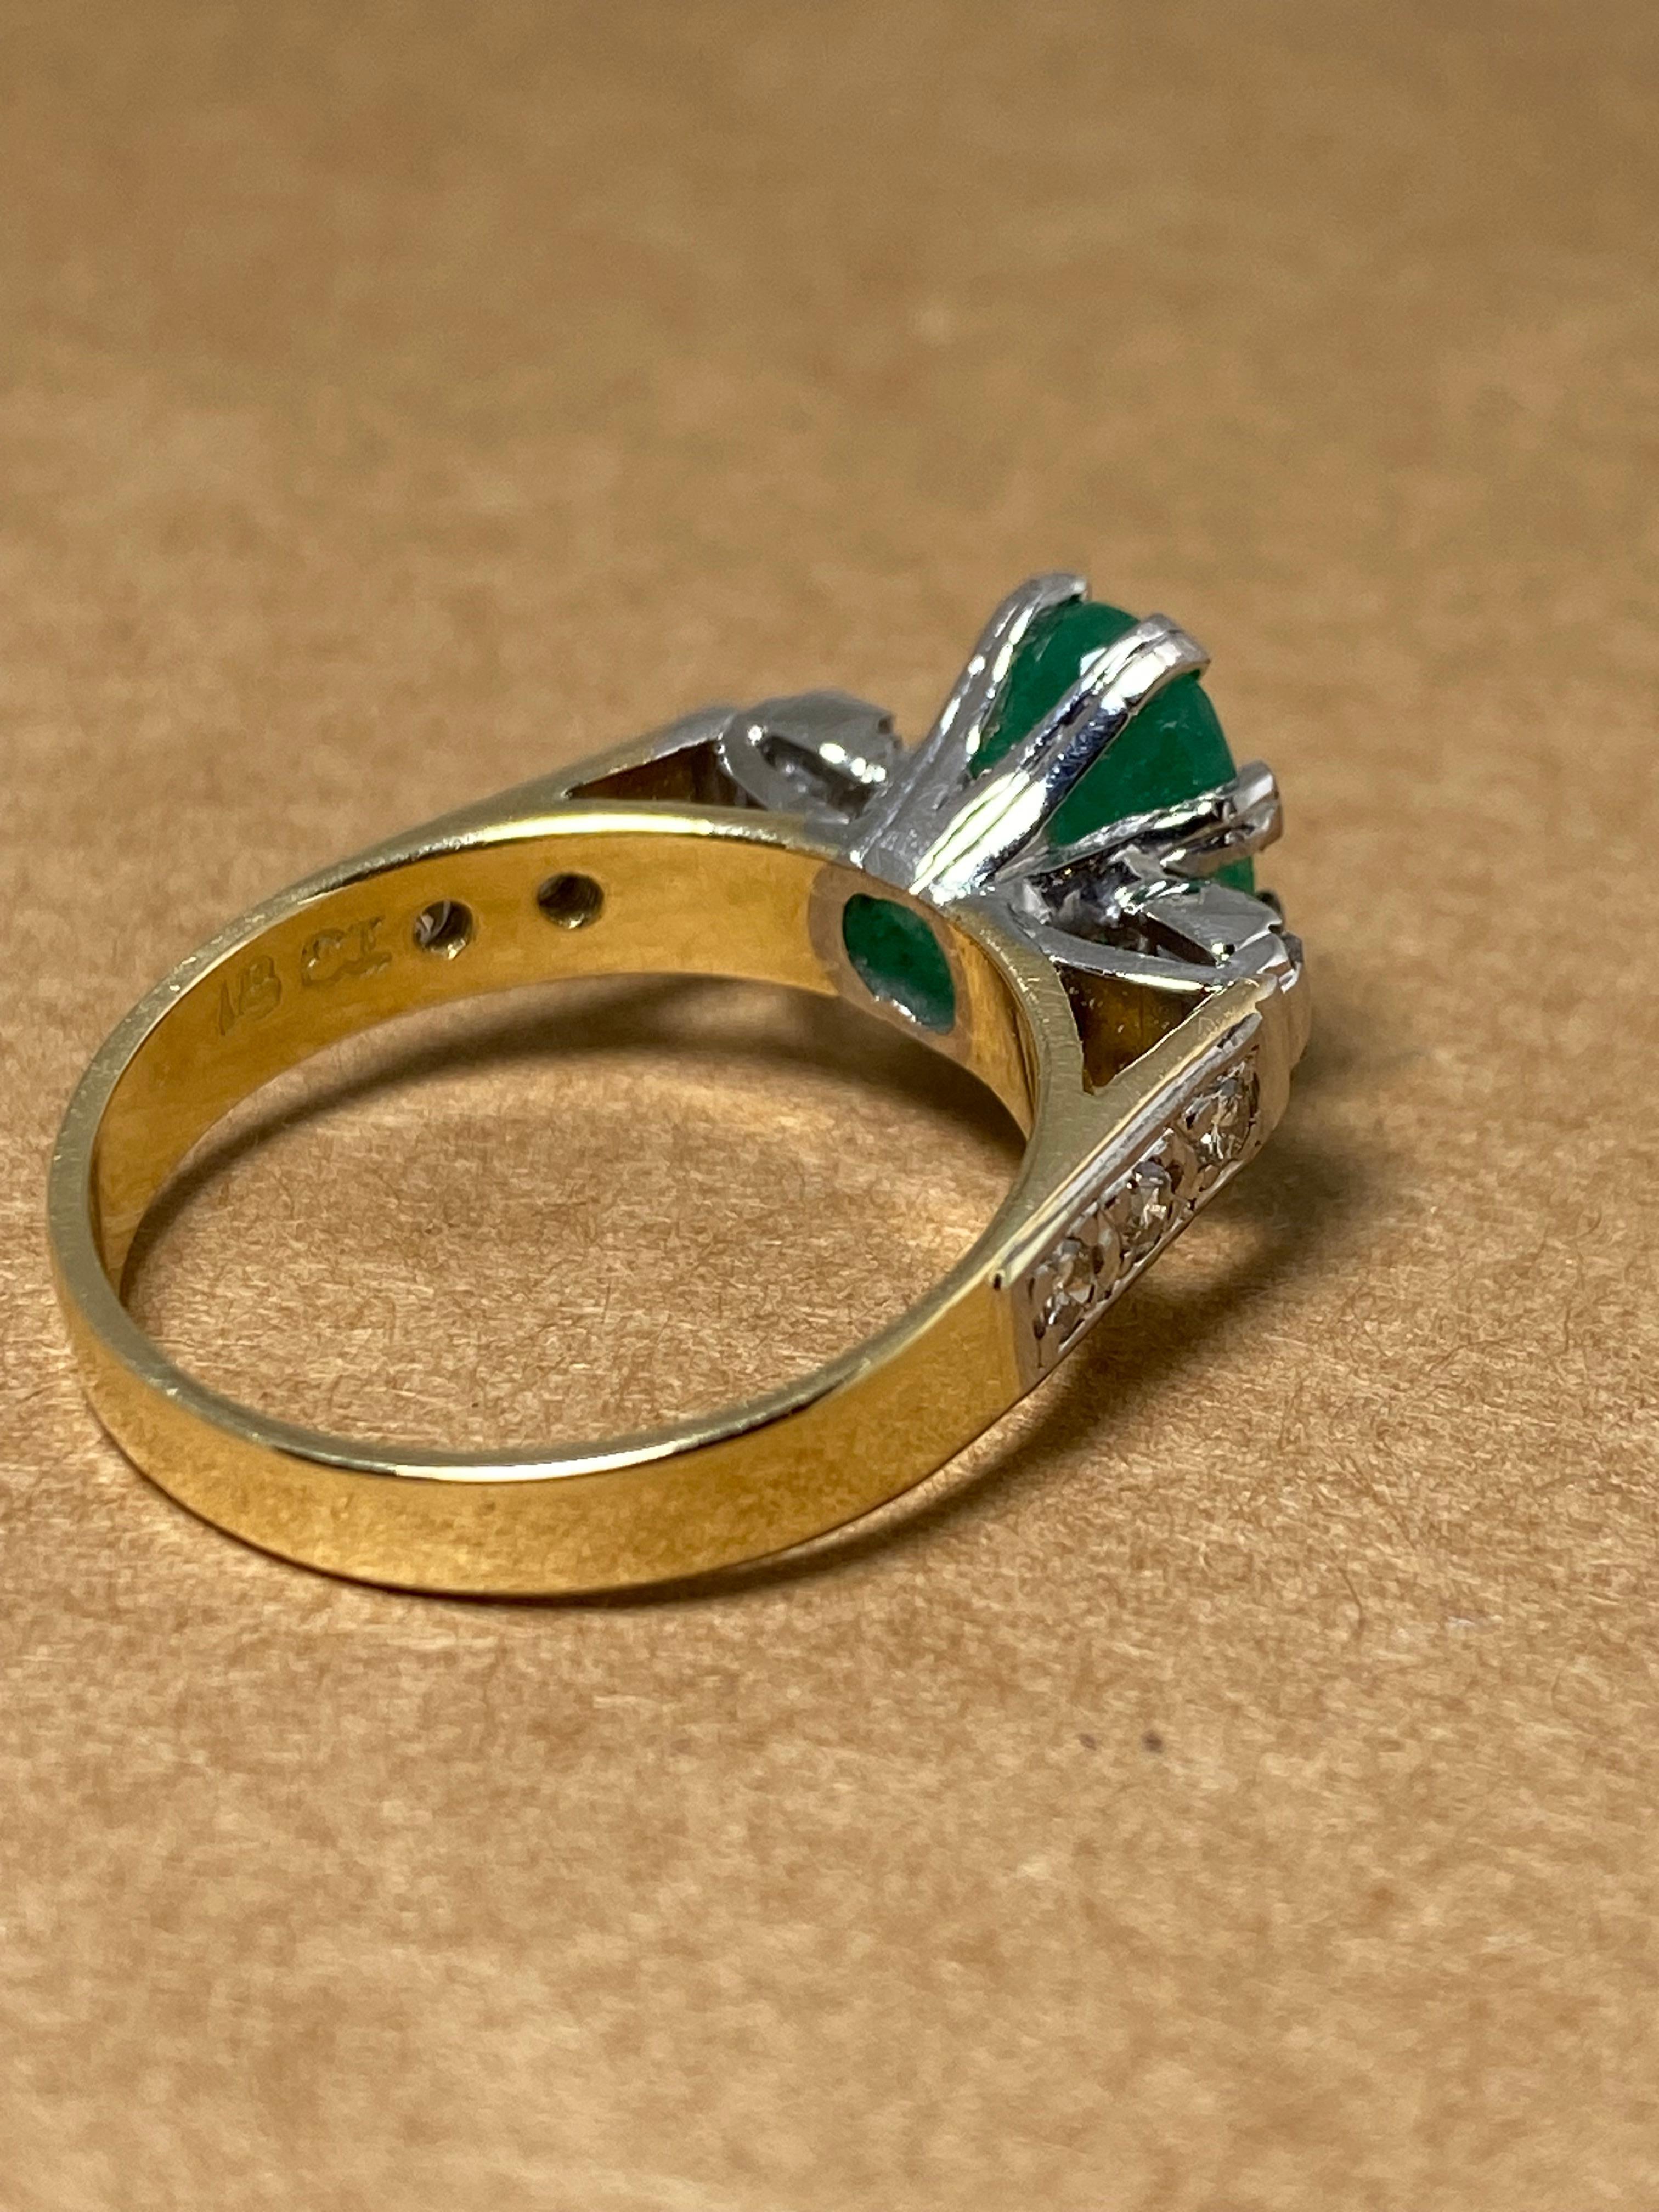 Of timeless solitaire with accents design,

featuring visually striking cathedral setting & 

top quality materials 

this piece is retro & handmade, 

dating back to 1960's 



~~



Centrally 8 double claw set with a Natural Emerald

of oval